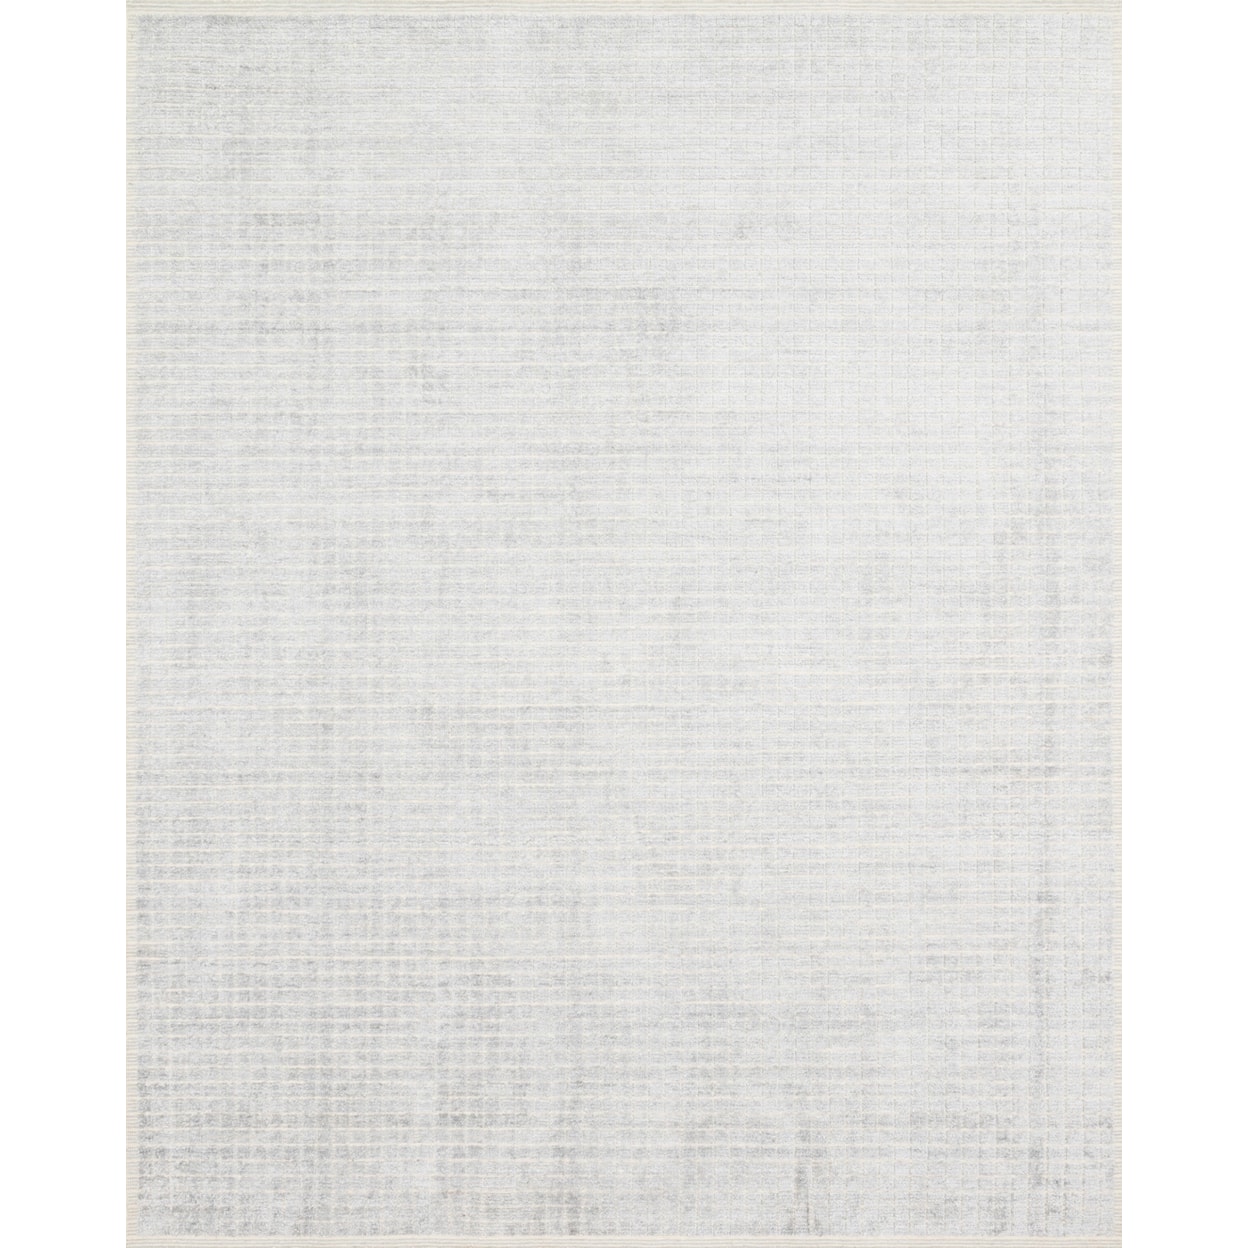 Loloi Rugs Beverly 8'6" x 11'6" Silver / Sky Rug